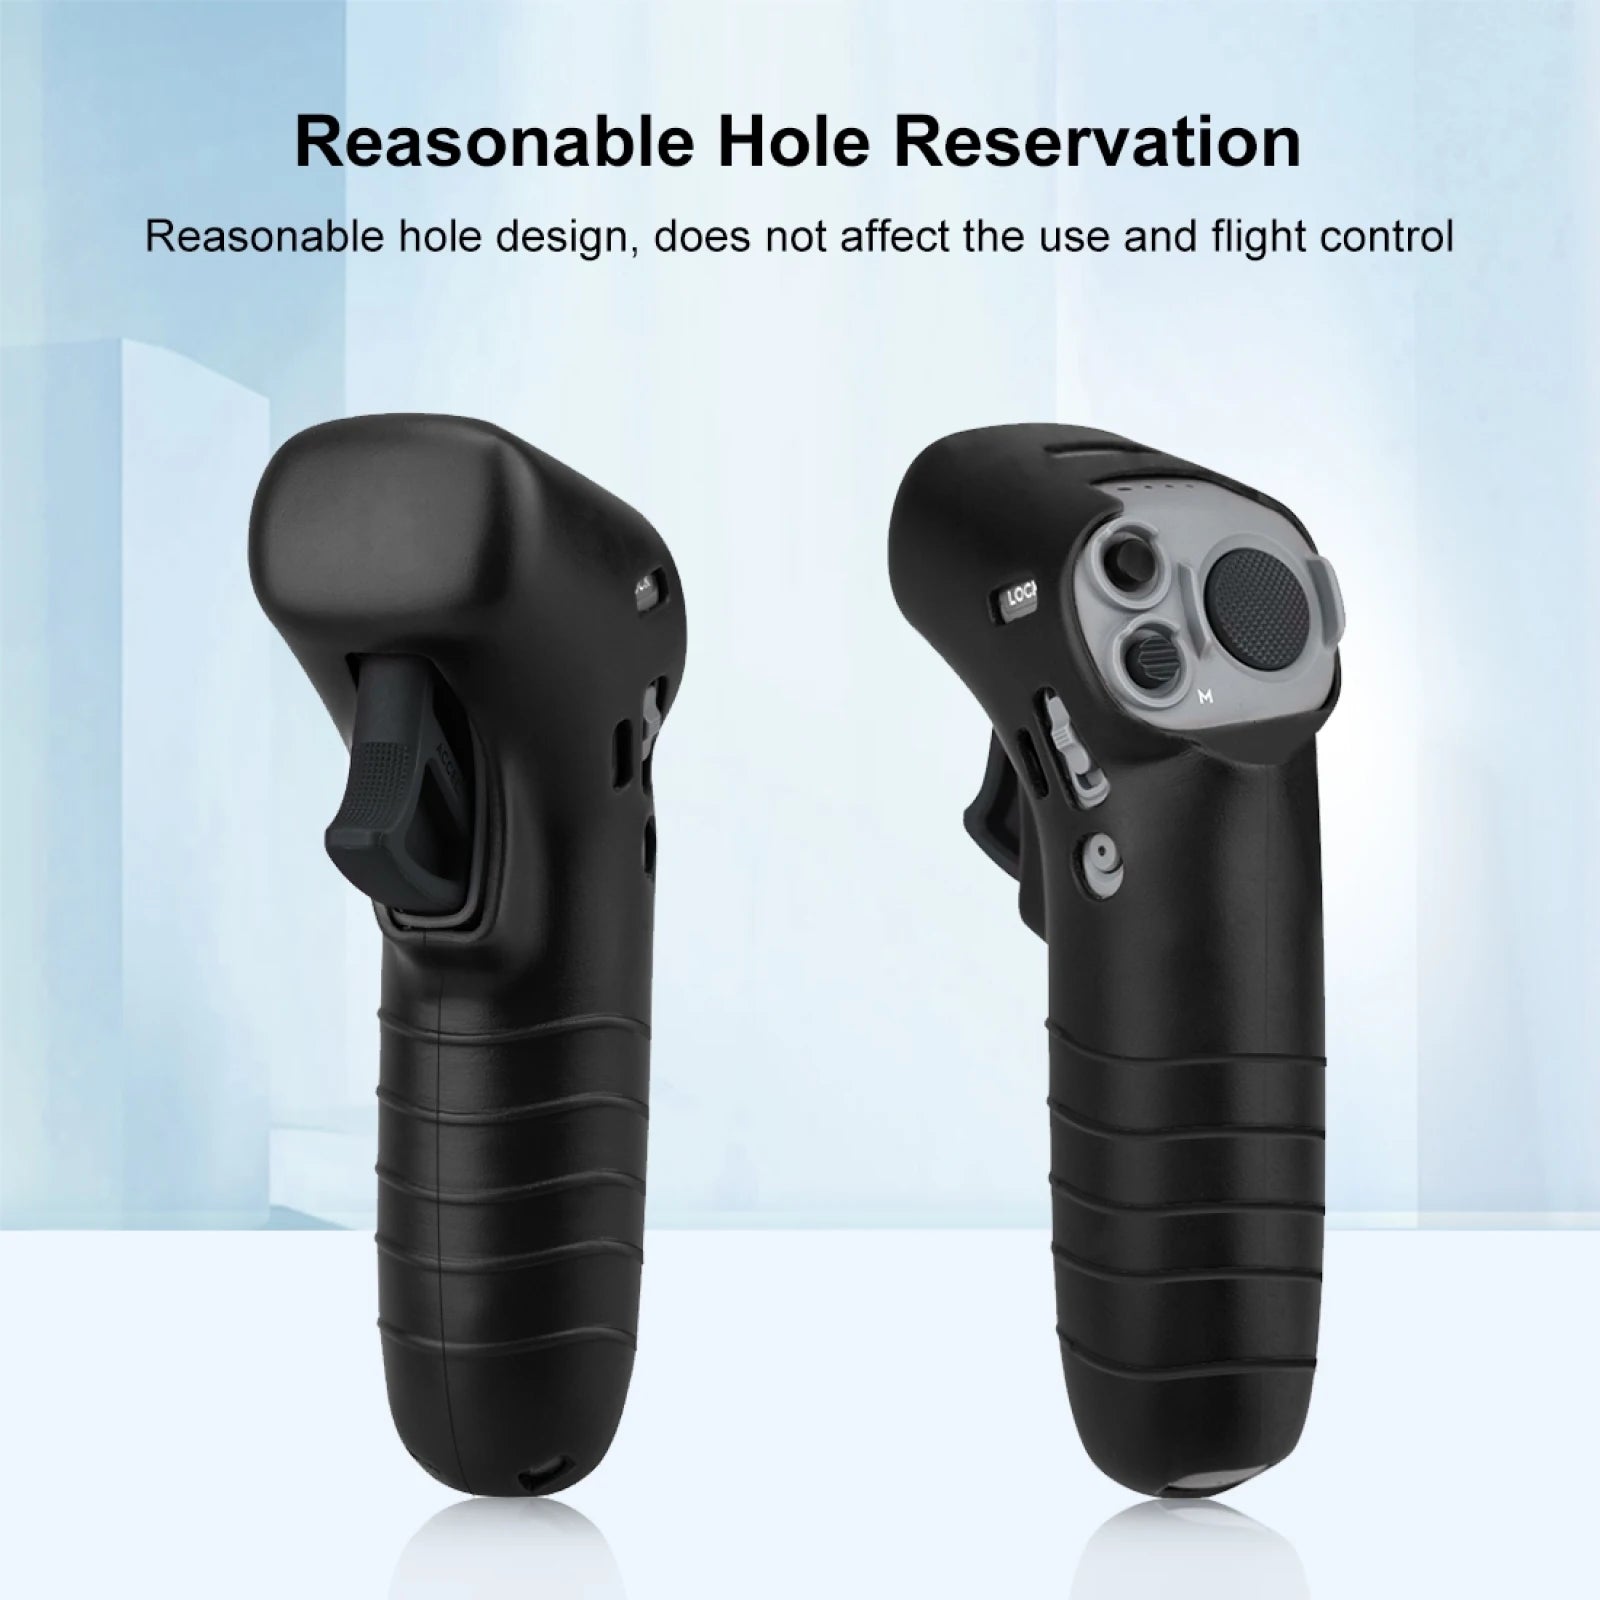 Reasonable Hole Reservation Reasonable hole design, does not affect the use and flight control 4